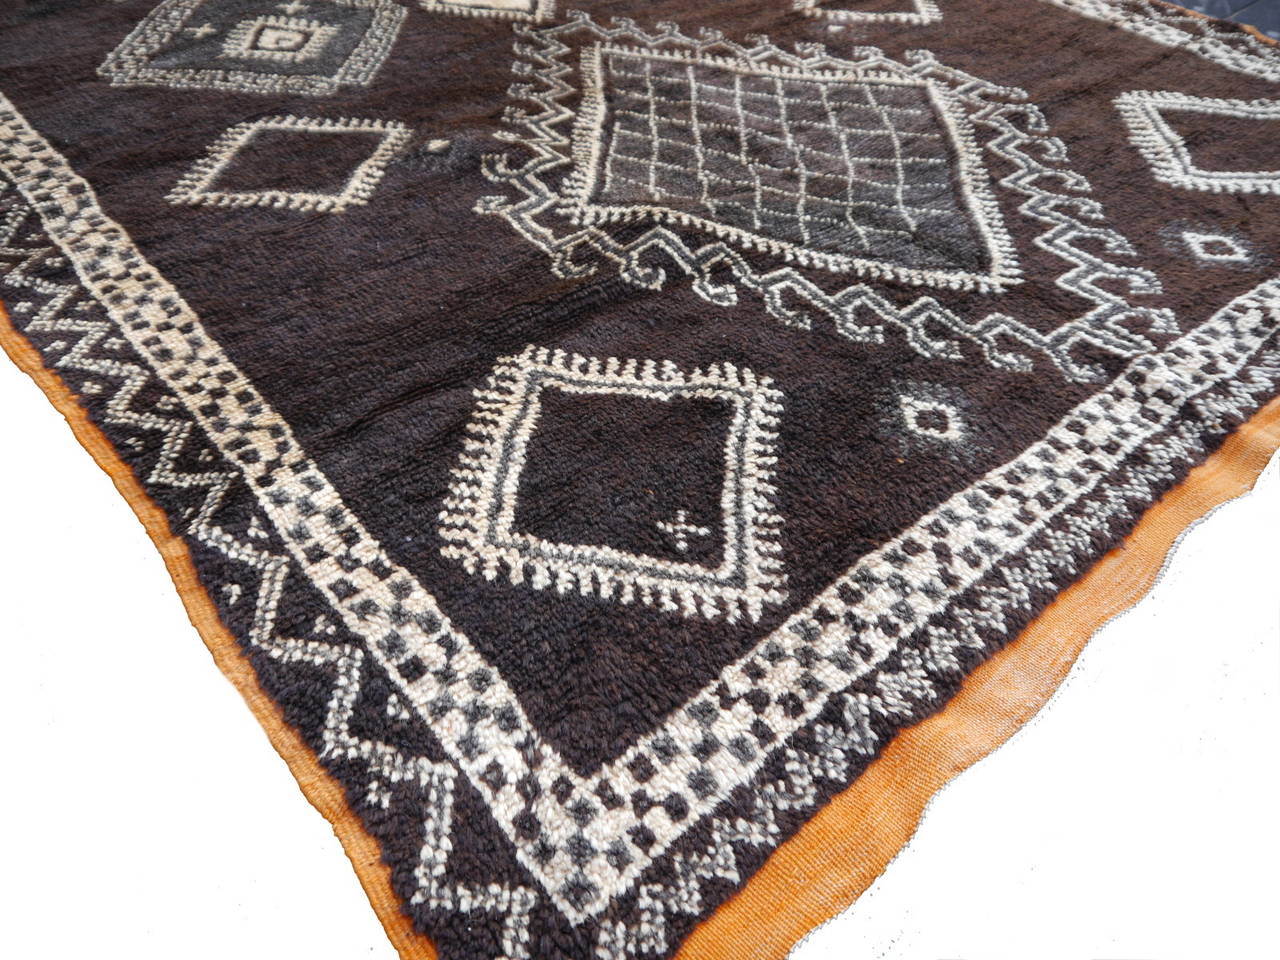 Very unusual colors and very fine weave make this rug a diamond under the productions from the Berber tribes in Morocco.